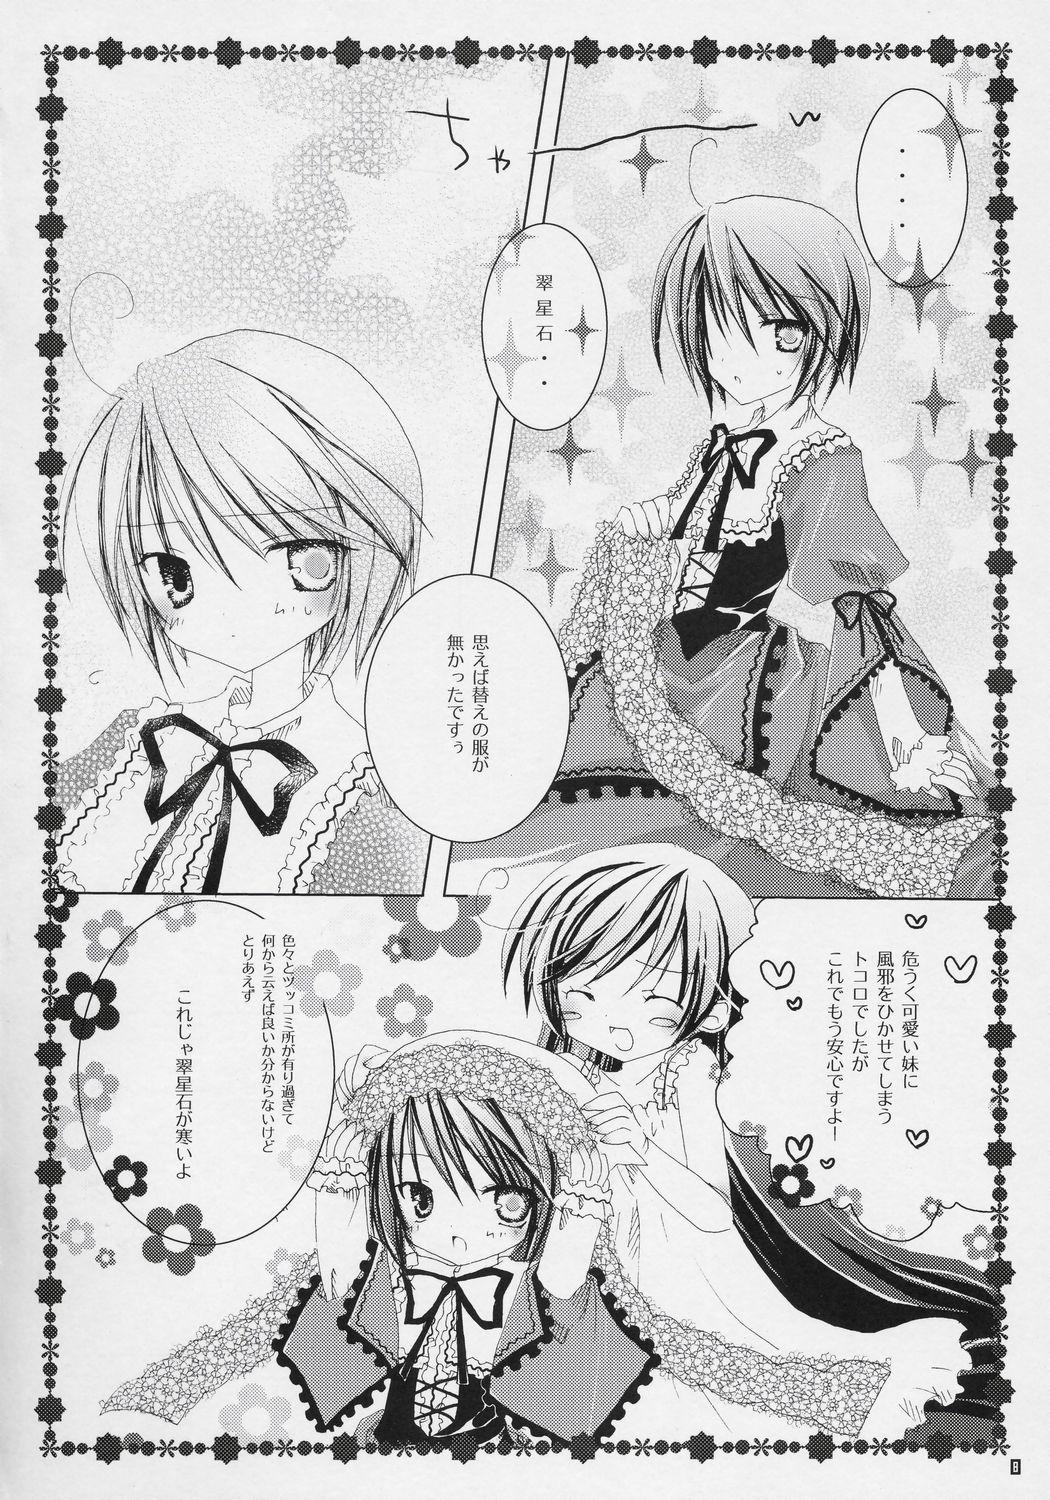 Couple TwinBerry - Rozen maiden Linda - Page 7